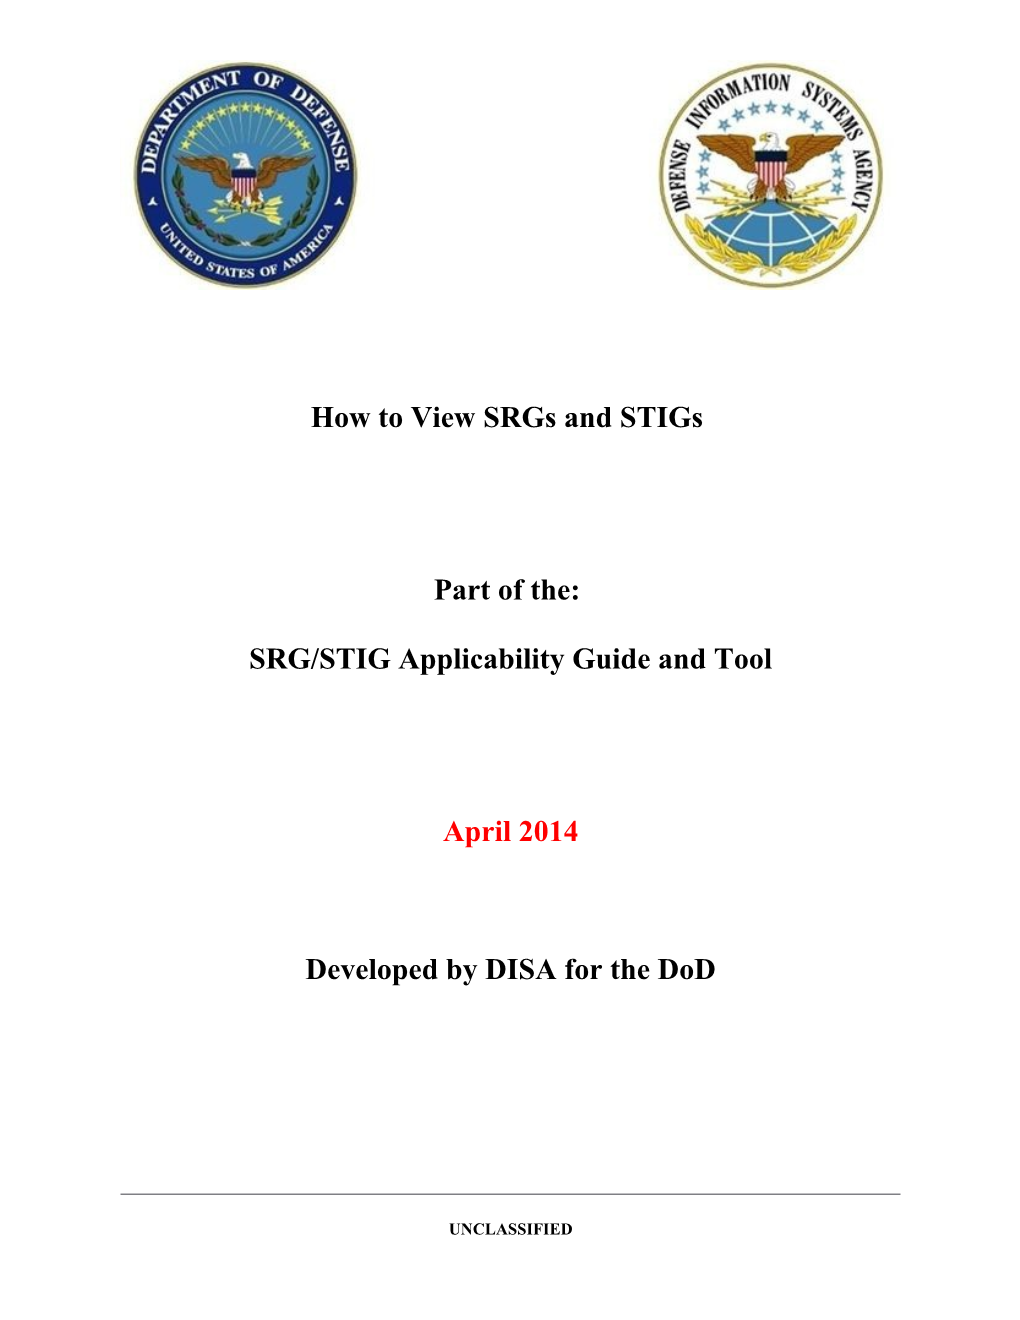 How to View Srgs and Stigs DISA Field Security Operations